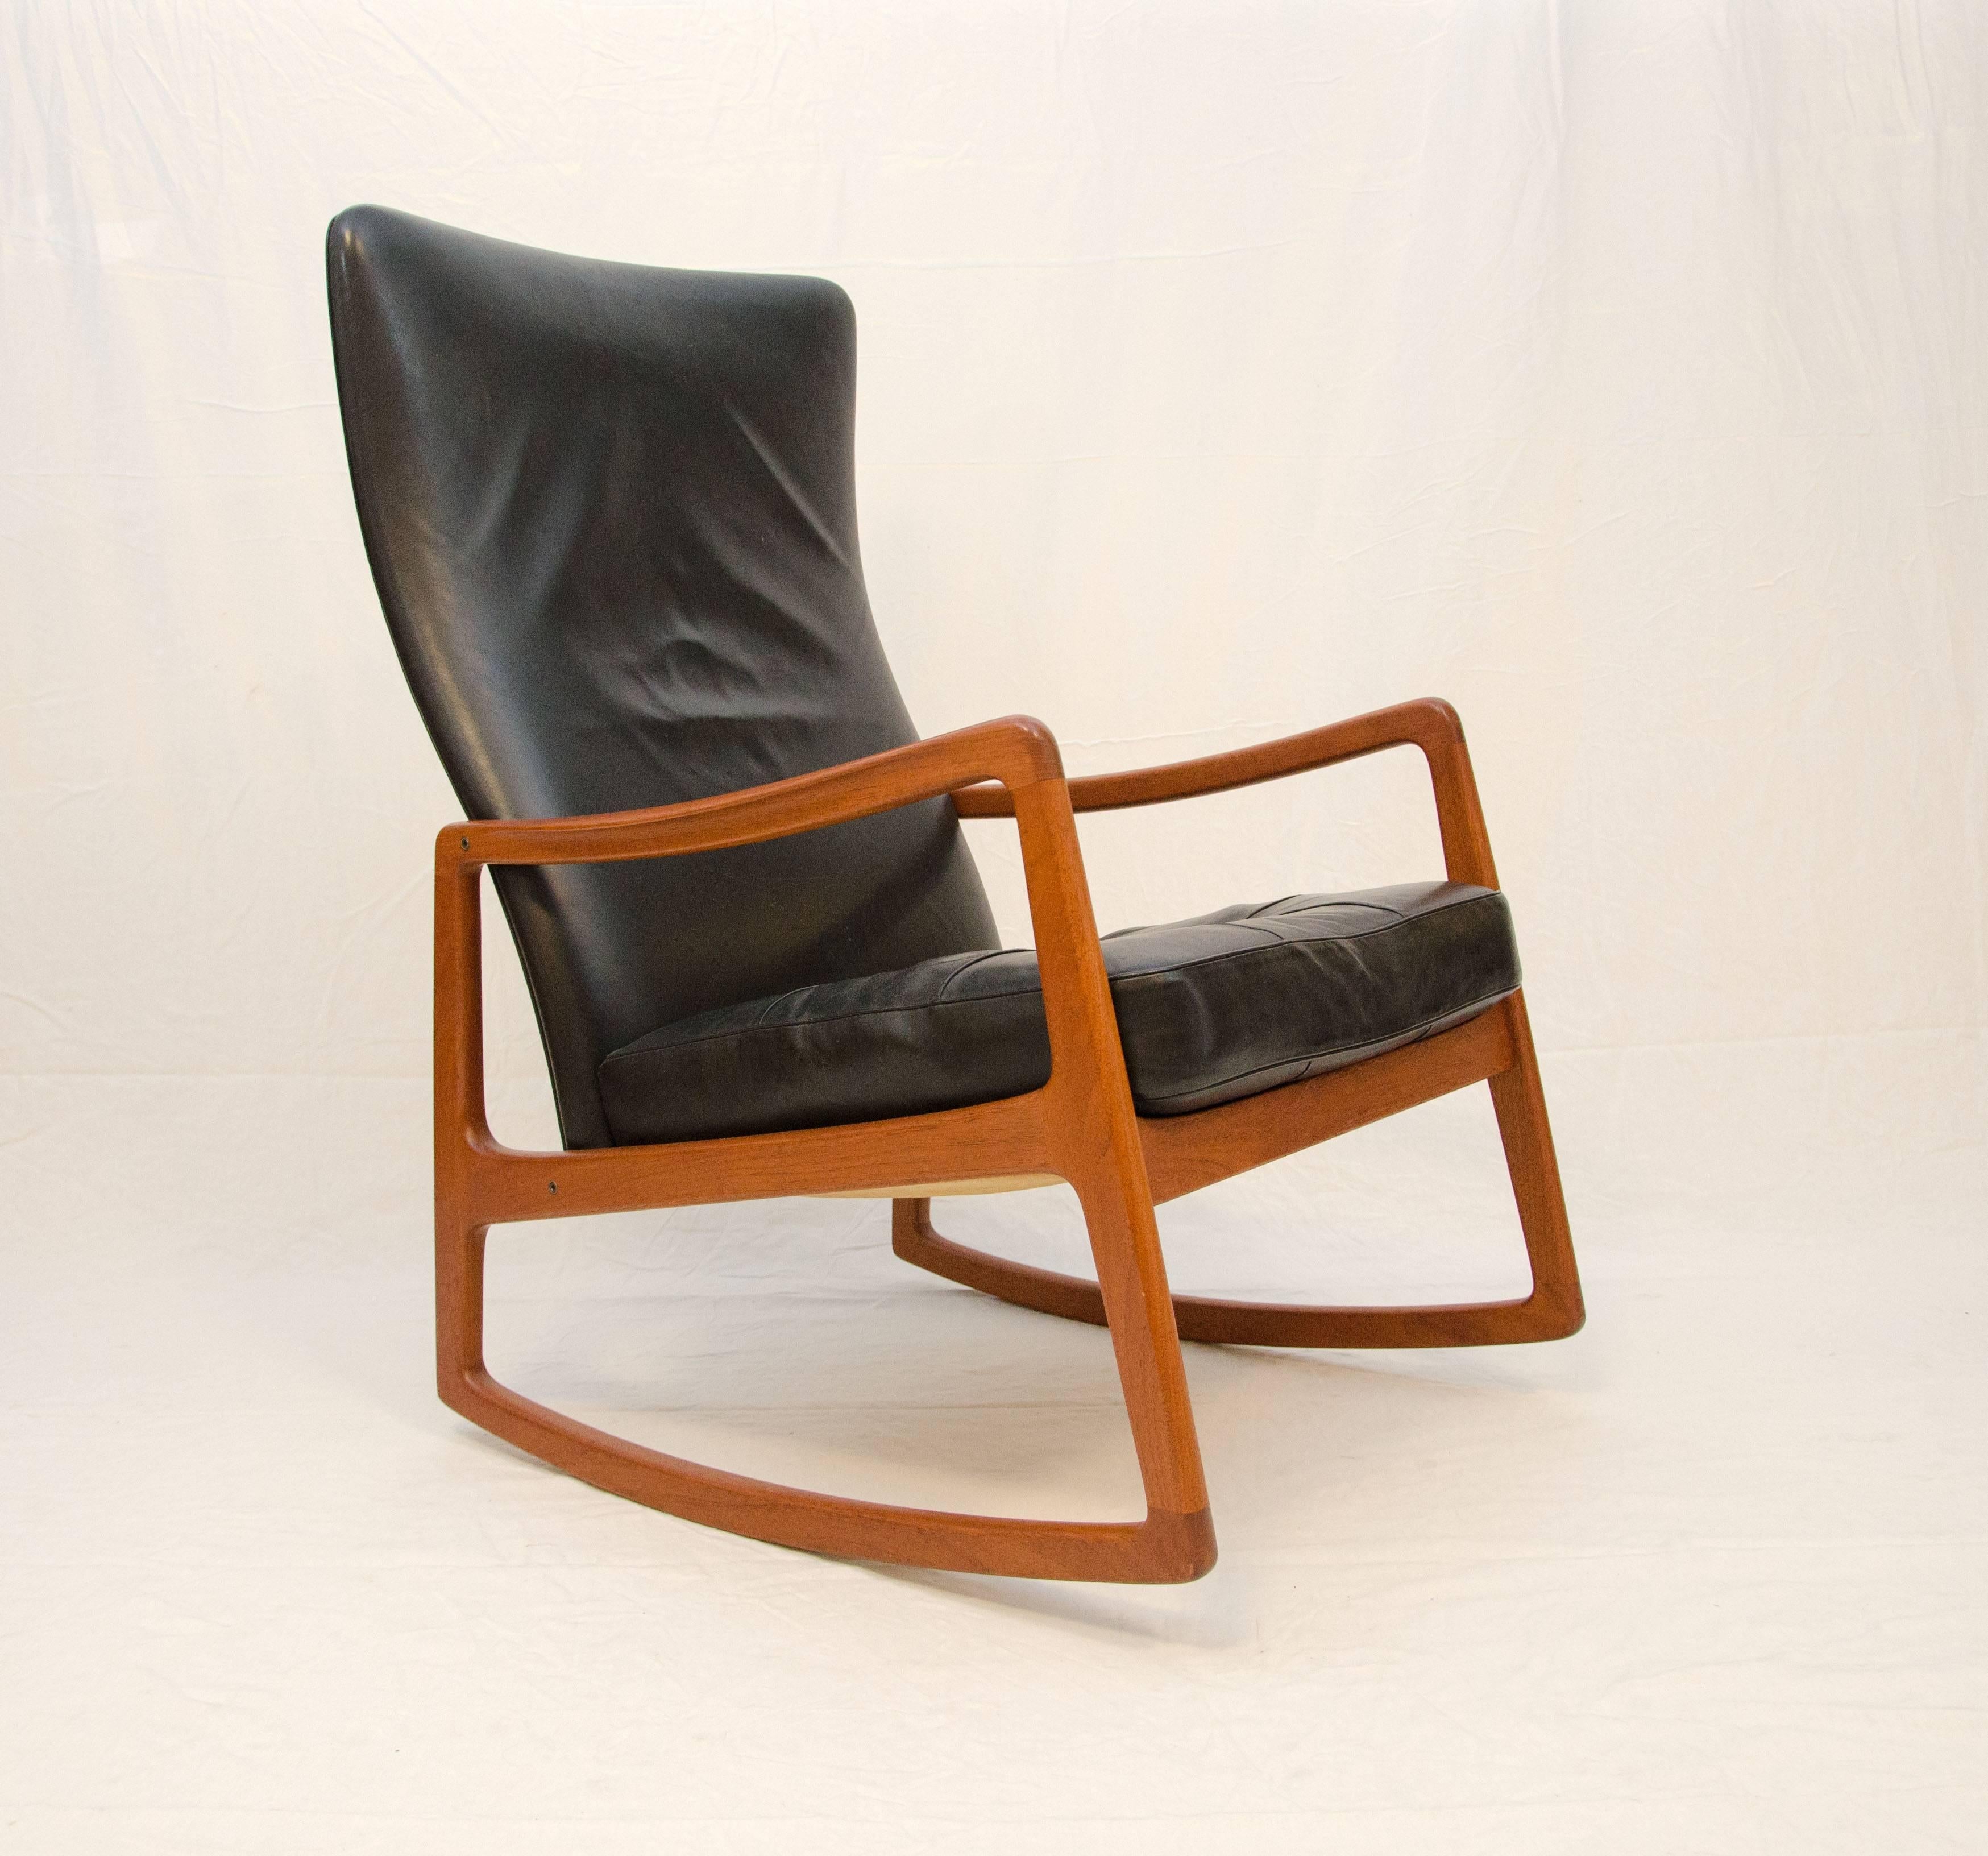 Comfortable and stylish high back rocking chair designed by Ole Wanscher and manufactured by France and Son in the 1950's. This high back model is difficult to find. Seat cushion is removable.